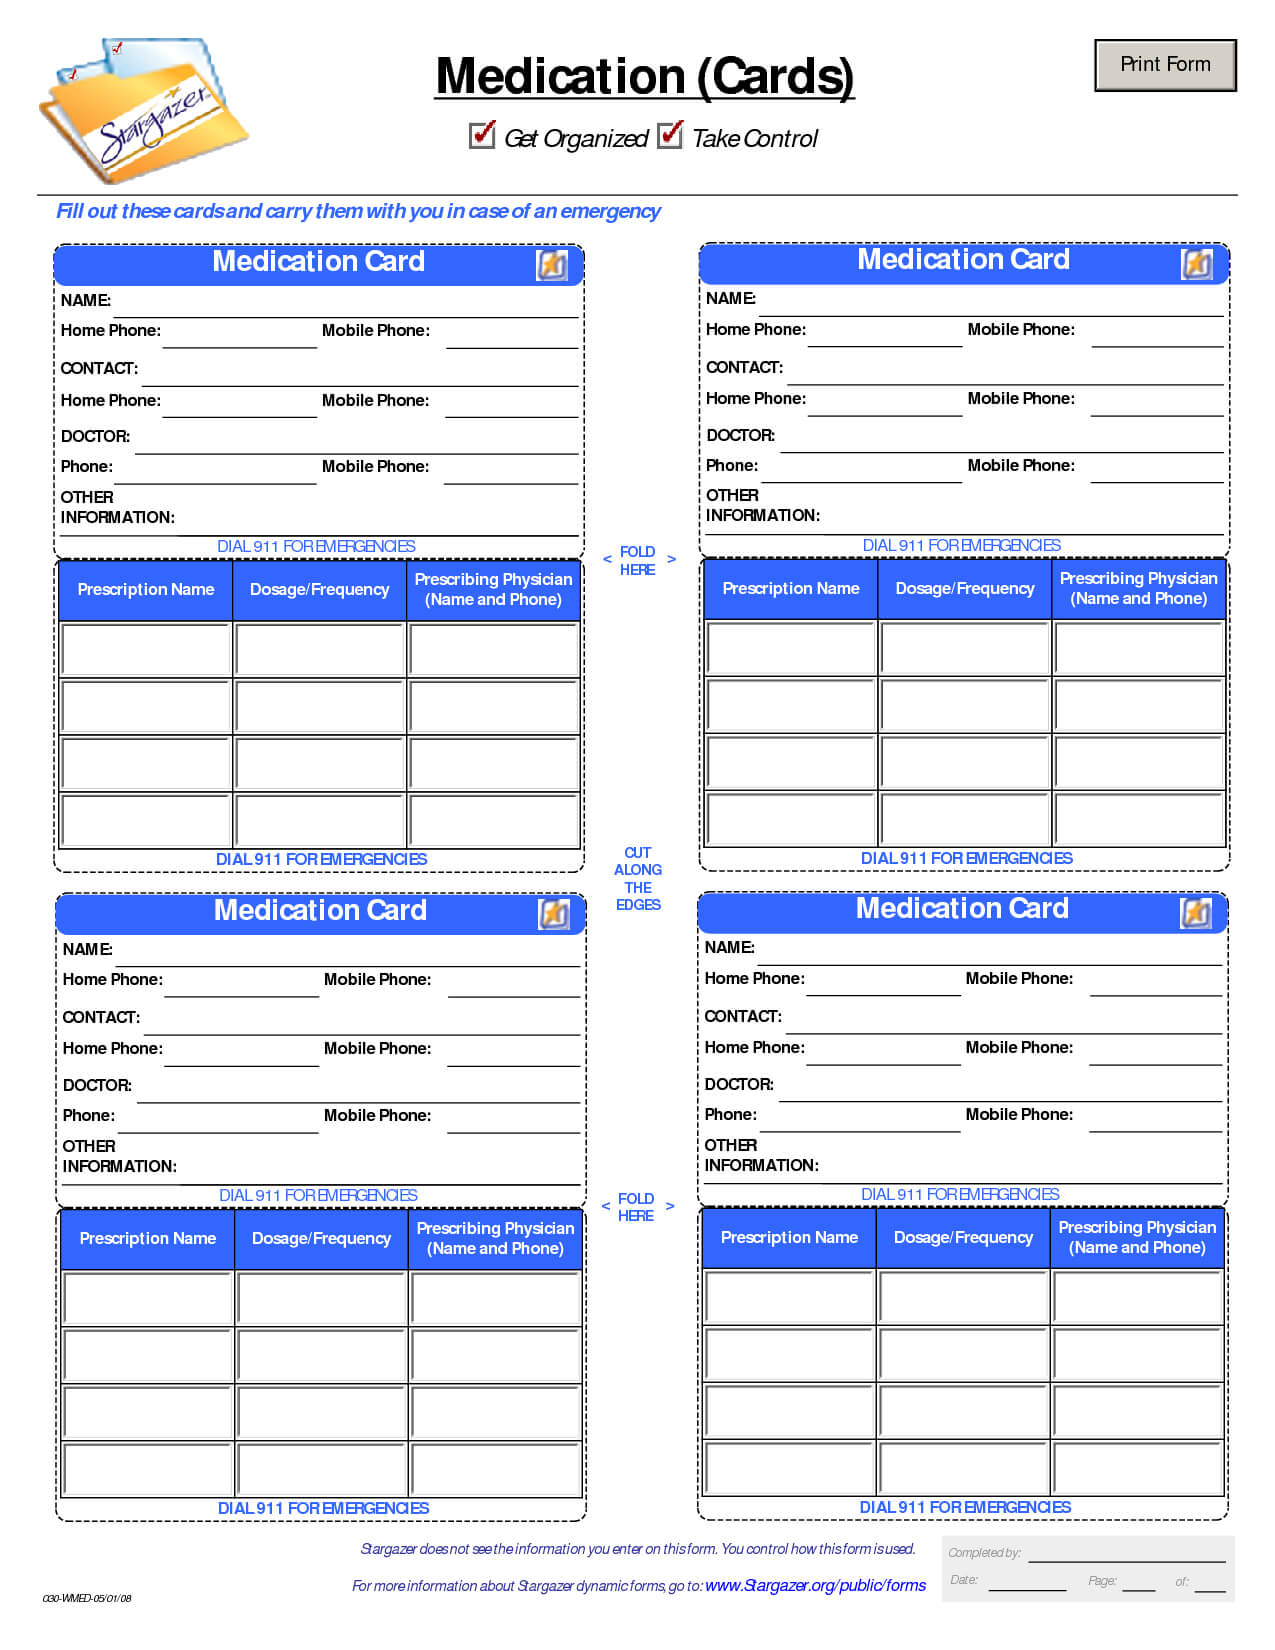 Patient Medication Card Template | Emergency Kits Throughout In Case Of Emergency Card Template